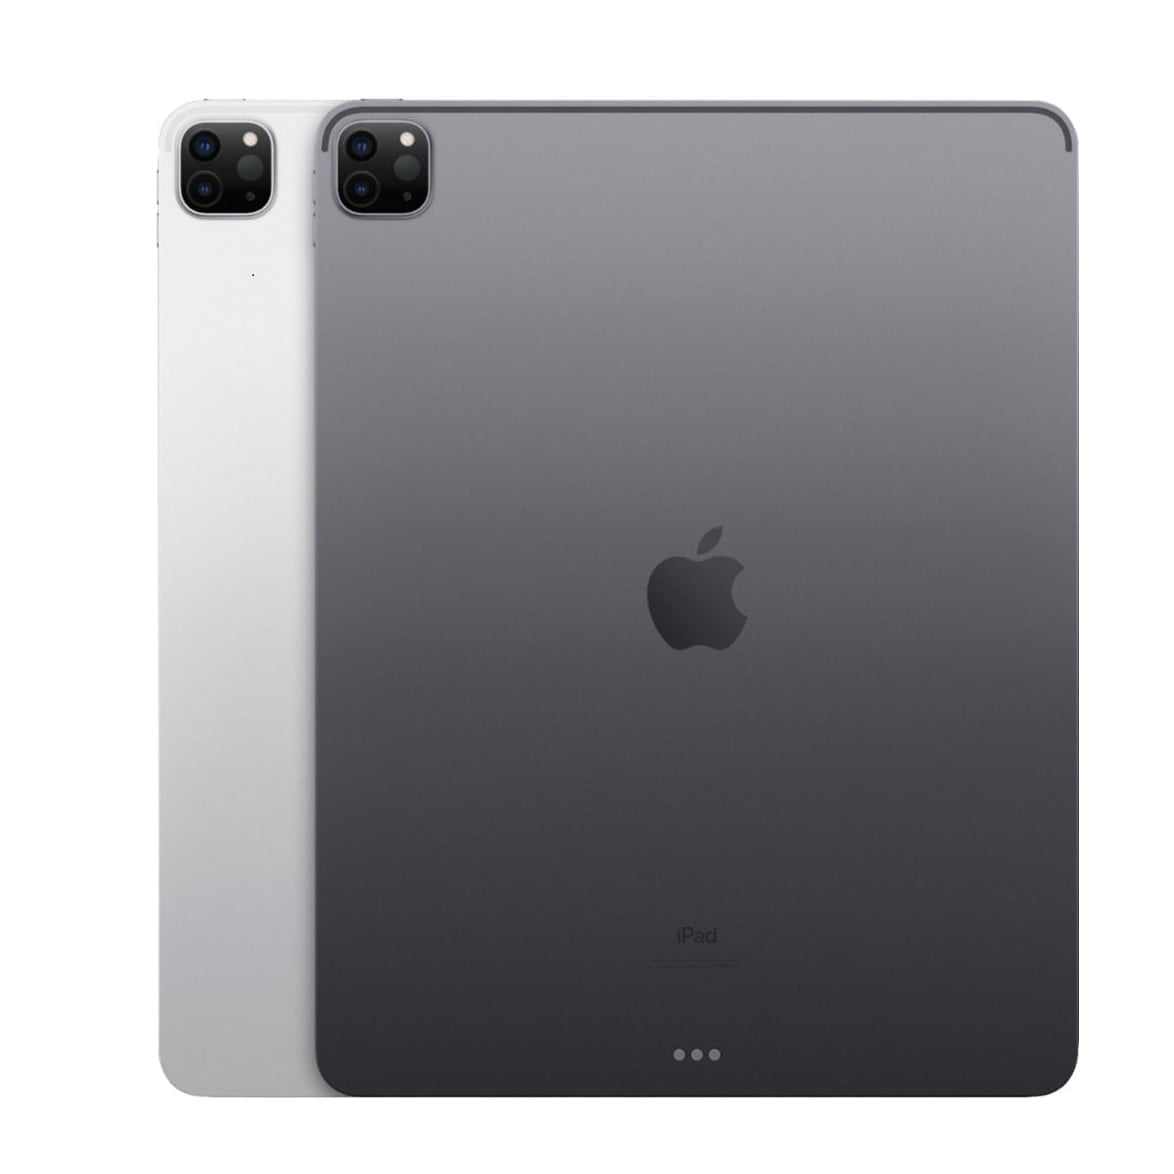 4264603Cv14D Apple &Lt;H1&Gt;Apple - 12.9-Inch Ipad Pro Latest Model With Wi-Fi - 256Gb - Space Gray&Lt;/H1&Gt; Ipad Pro Features The Powerful Apple M1 Chip For Next-Level Performance And All-Day Battery Life.an Immersive 12.9-Inch Liquid Retina Xdr Display For Viewing And Editing Hdr Photos And Videos. And A Front Camera With Center Stage Keeps You In Frame Automatically During Video Calls. Ipad Pro Has Pro Cameras And A Lidar Scanner For Stunning Photos, Videos, And Immersive Ar. Thunderbolt For Connecting To High-Performance Accessories. And You Can Add Apple Pencil For Note-Taking, Drawing, And Marking Up Documents, And The Magic Keyboard For A Responsive Typing Experience And Trackpad. Ipad Pro Apple 12.9-Inch Ipad Pro Latest Model With Wi-Fi - 256Gb - Space Gray Mhnh3